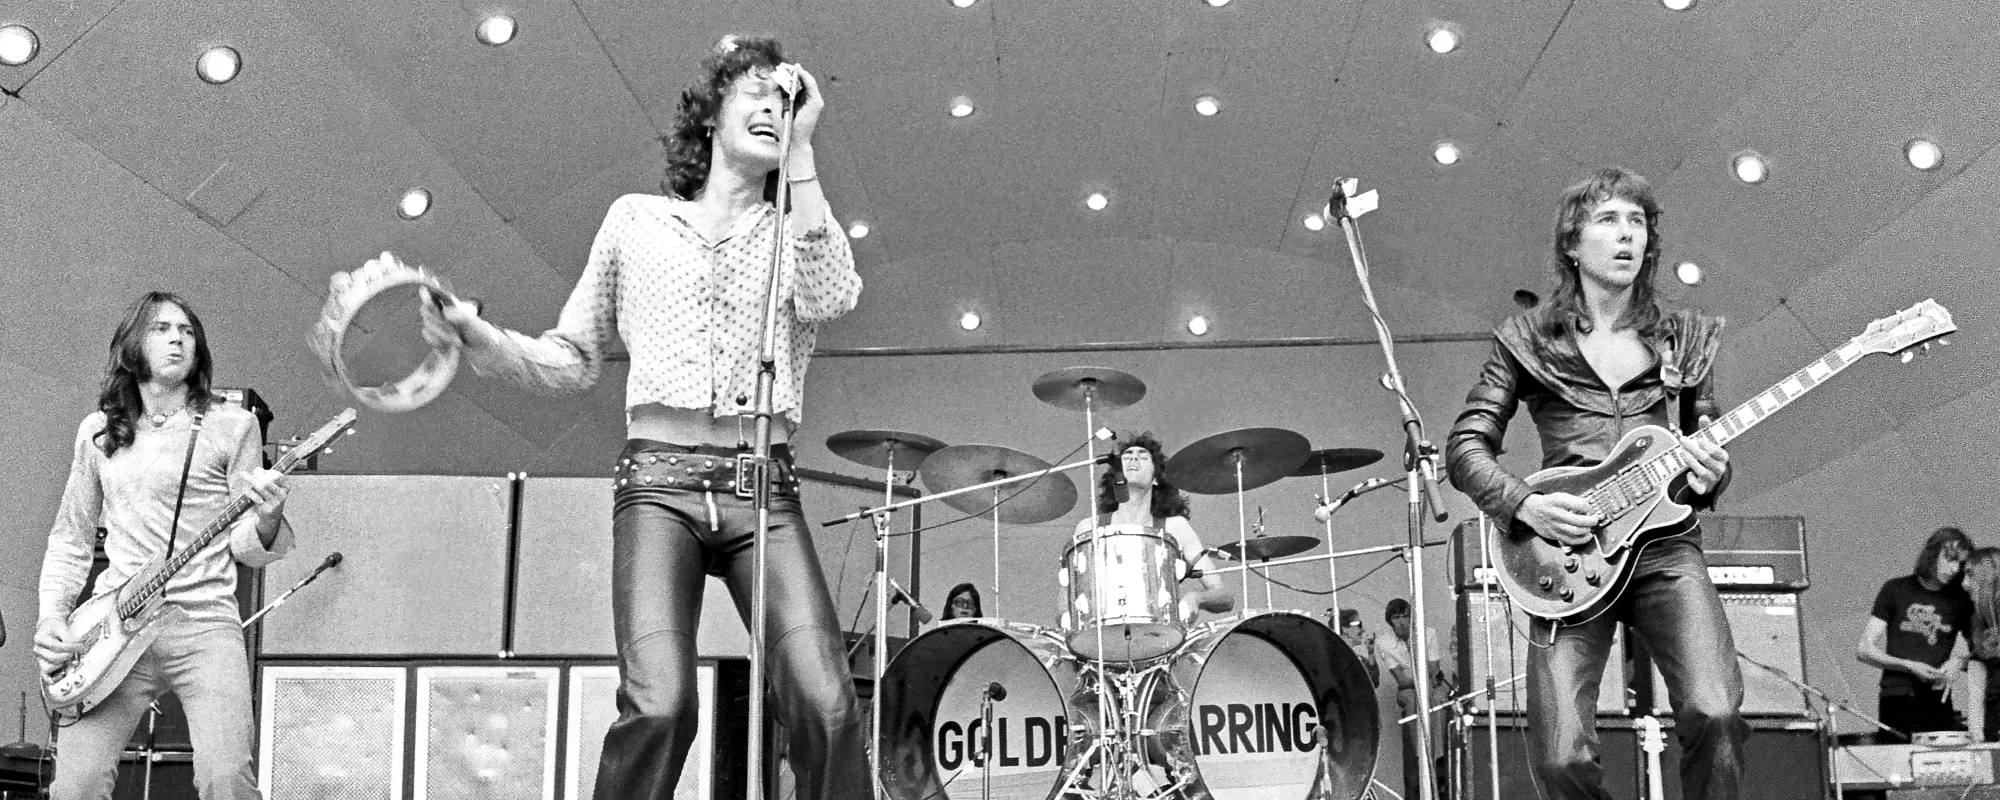 Behind the Band Name: Golden Earring